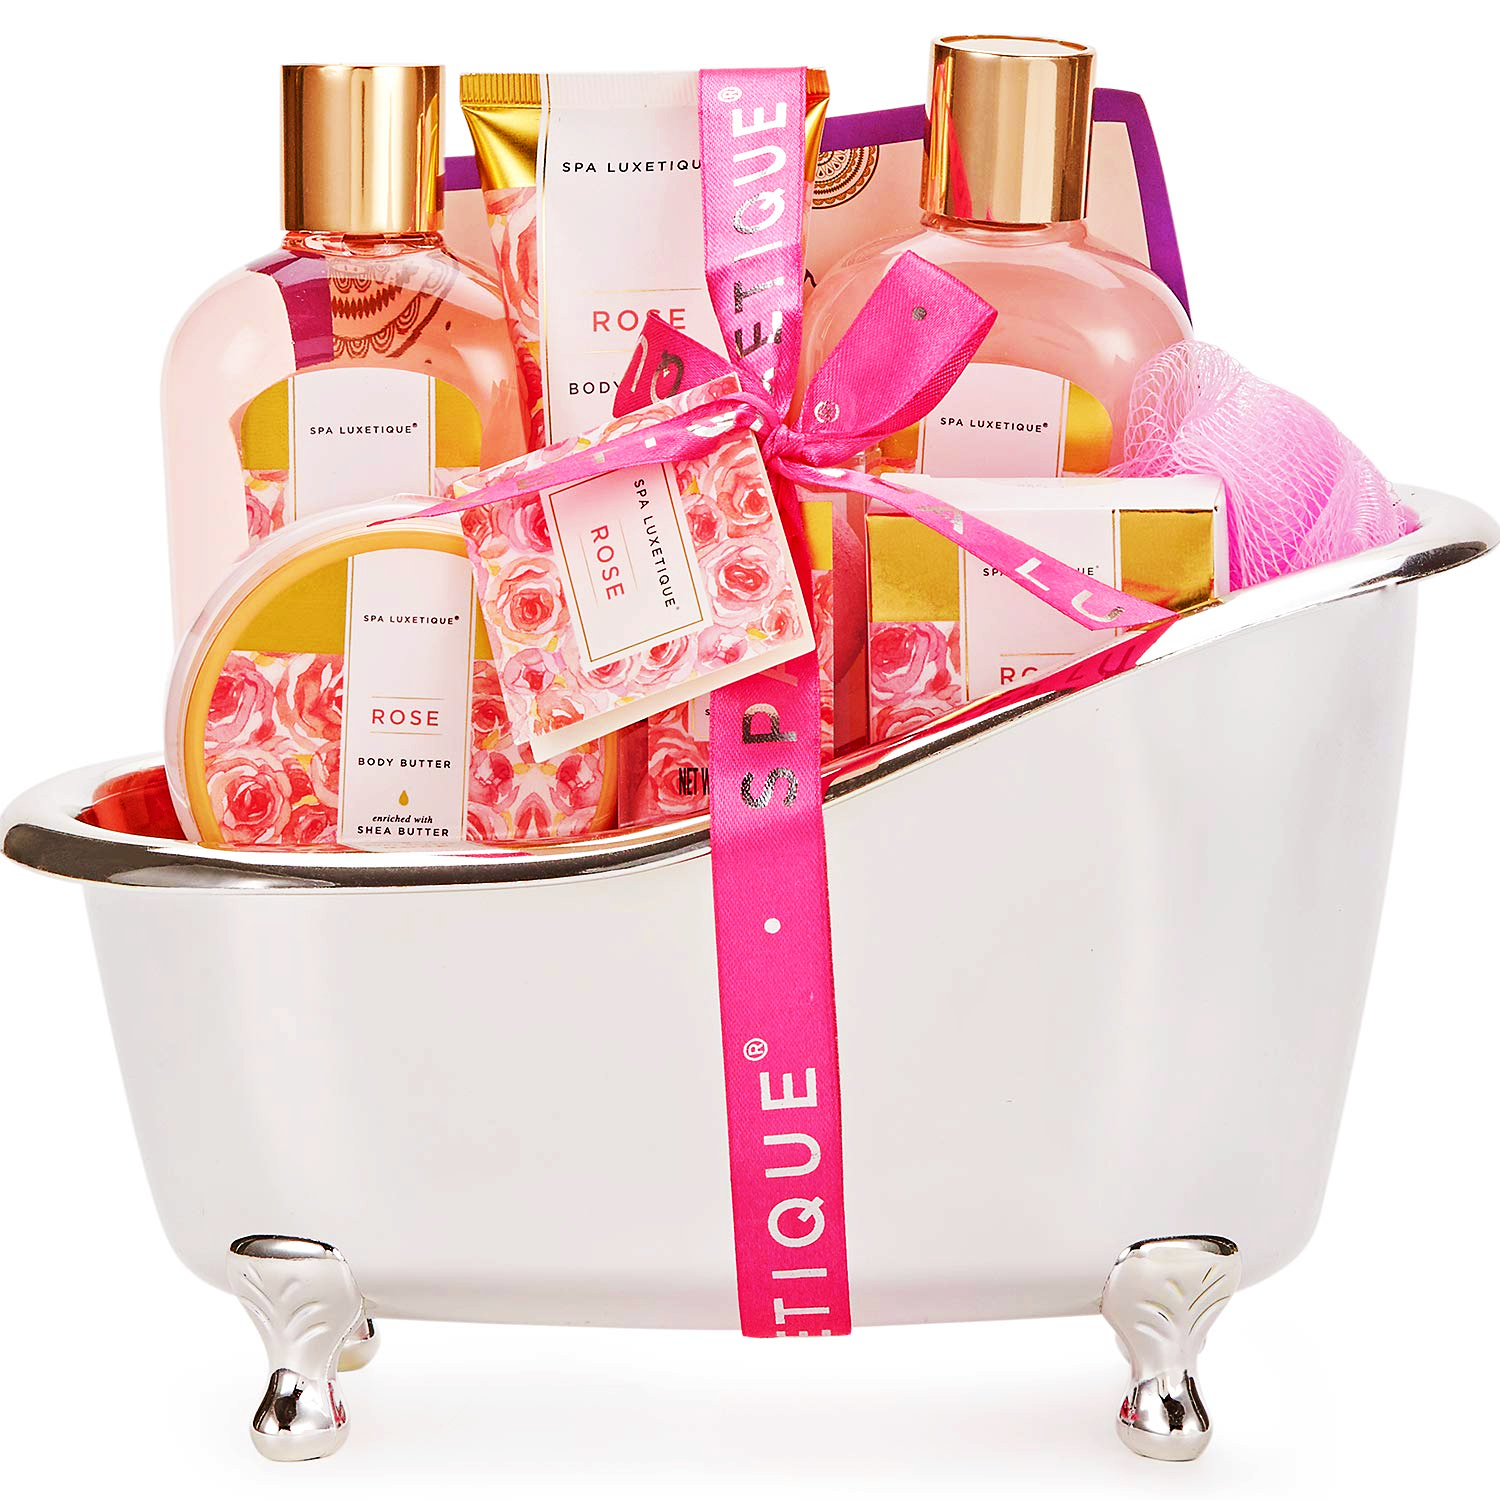 Spa Gift Baskets for Women - 9 Pcs Rose Bath Gift Kits, Birthday Holiday Beauty Body Care Gift Sets for Her, Mothers Day Gifts for Mom - image 1 of 10